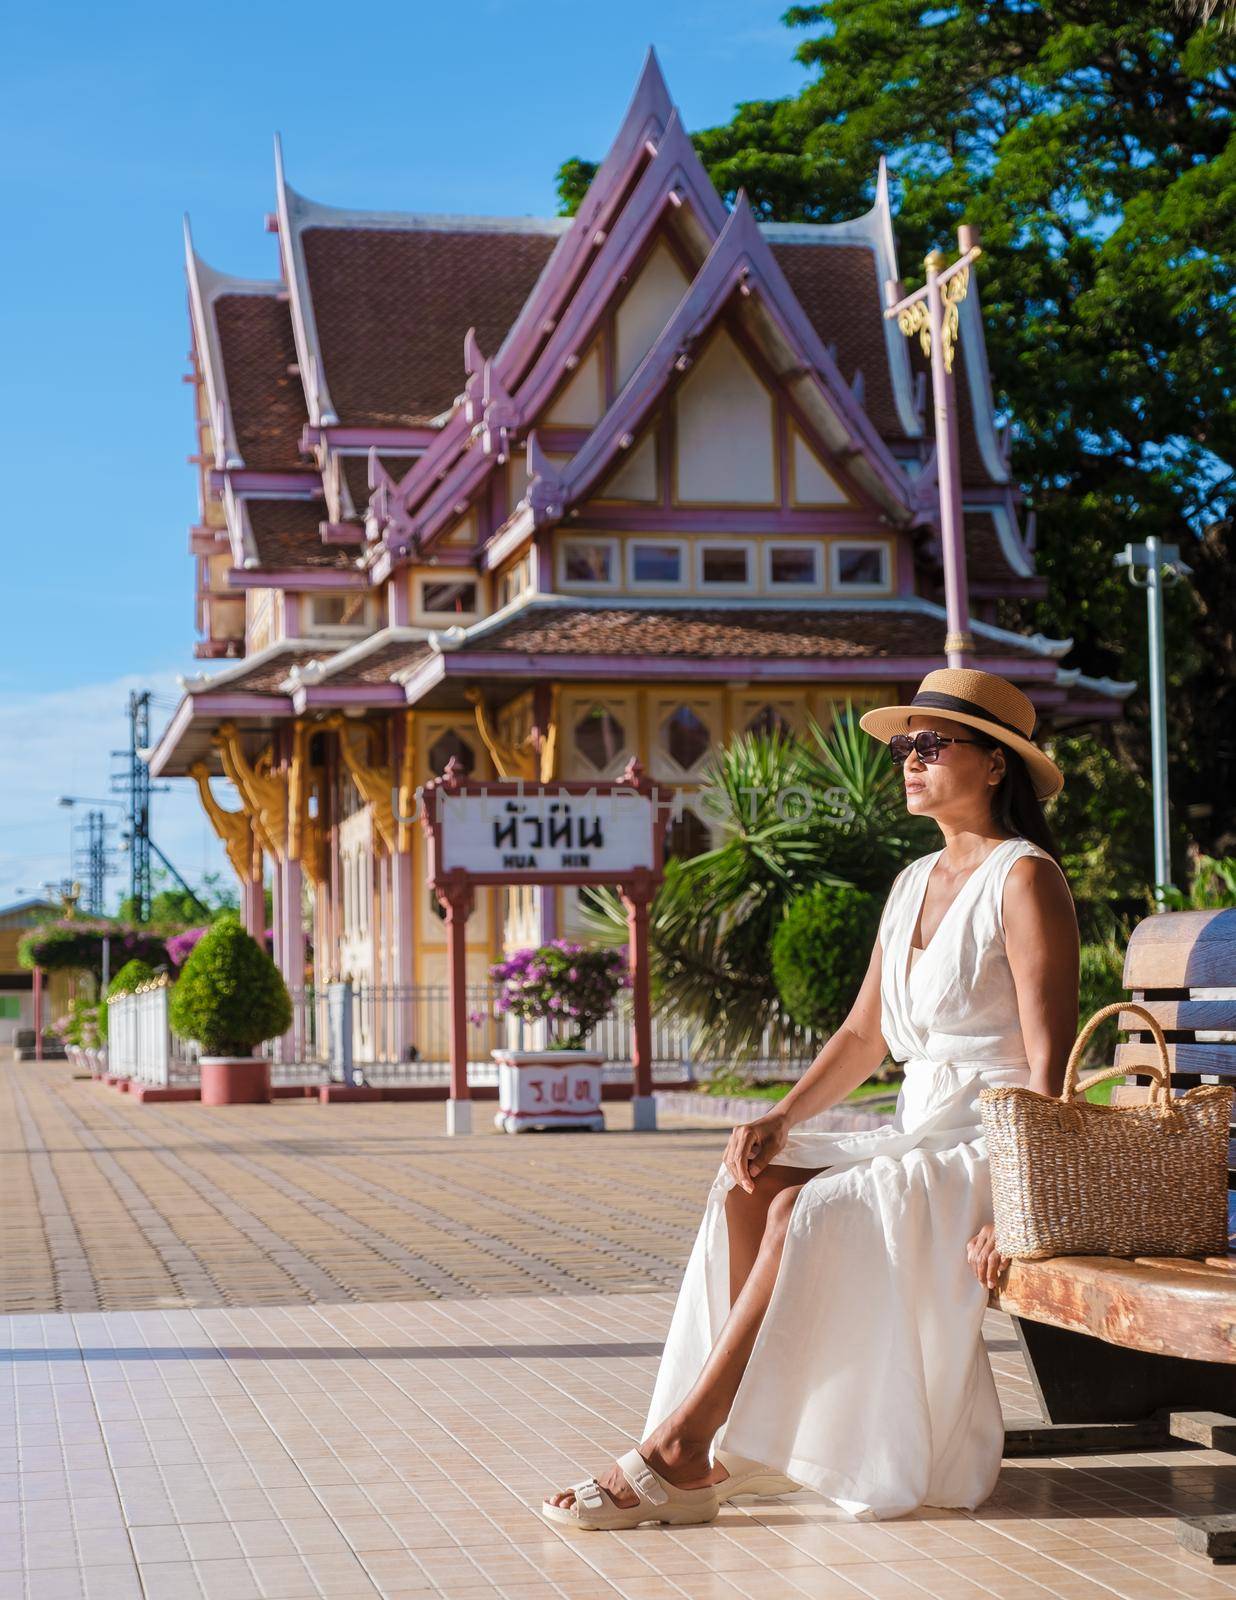 Asian woman with a hat and bag waiting for the train at Hua Hin train station in Thailand.